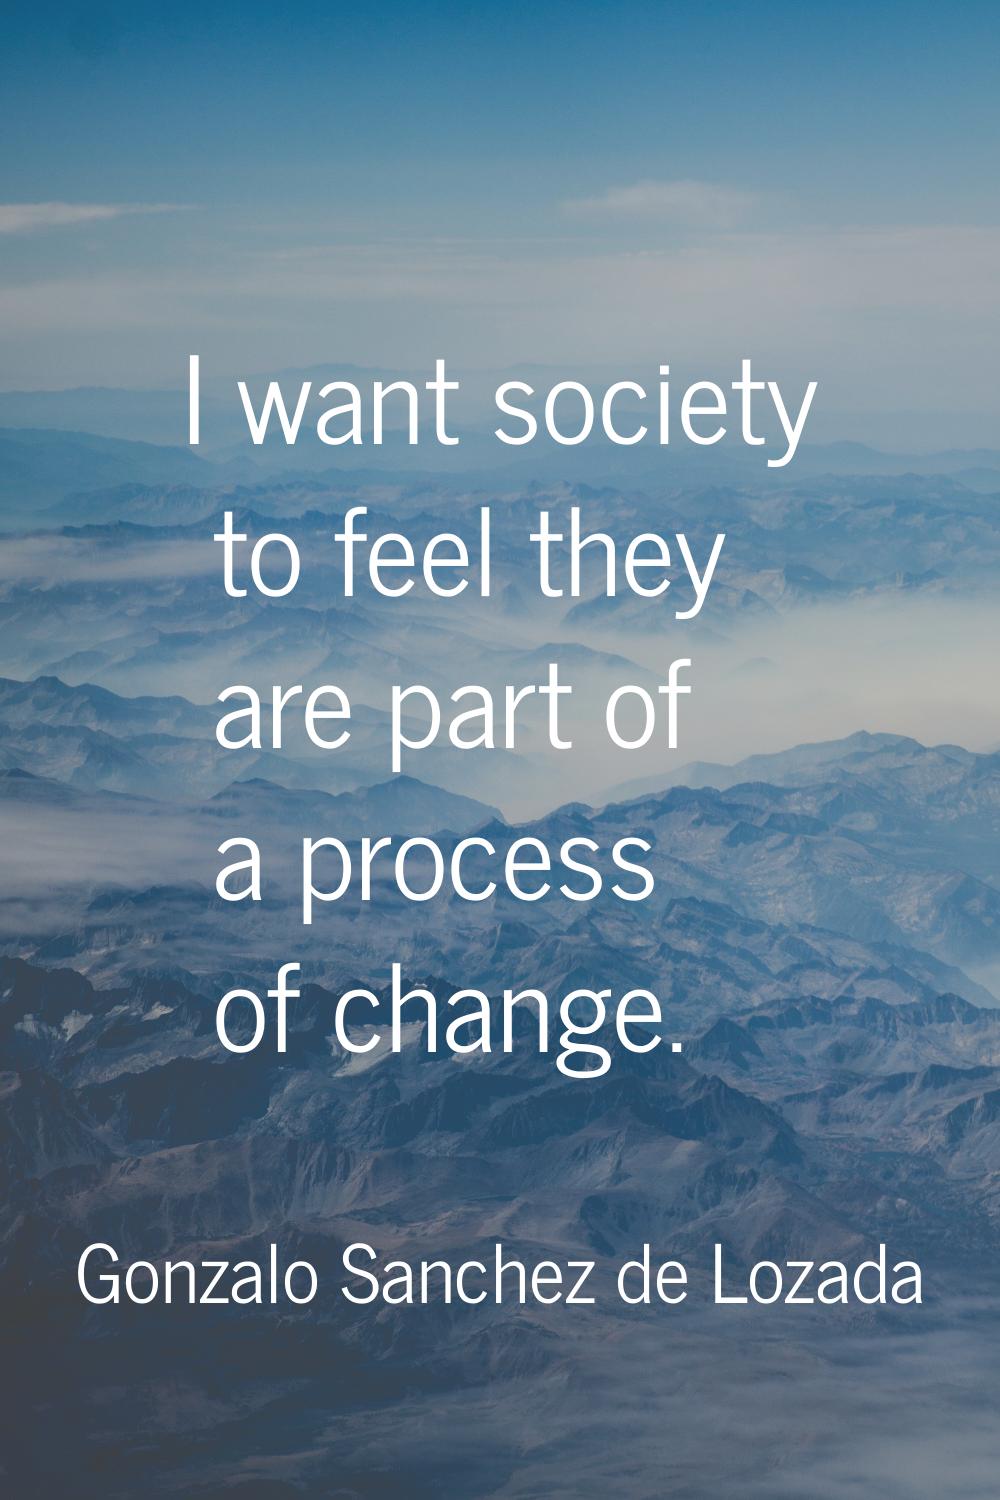 I want society to feel they are part of a process of change.